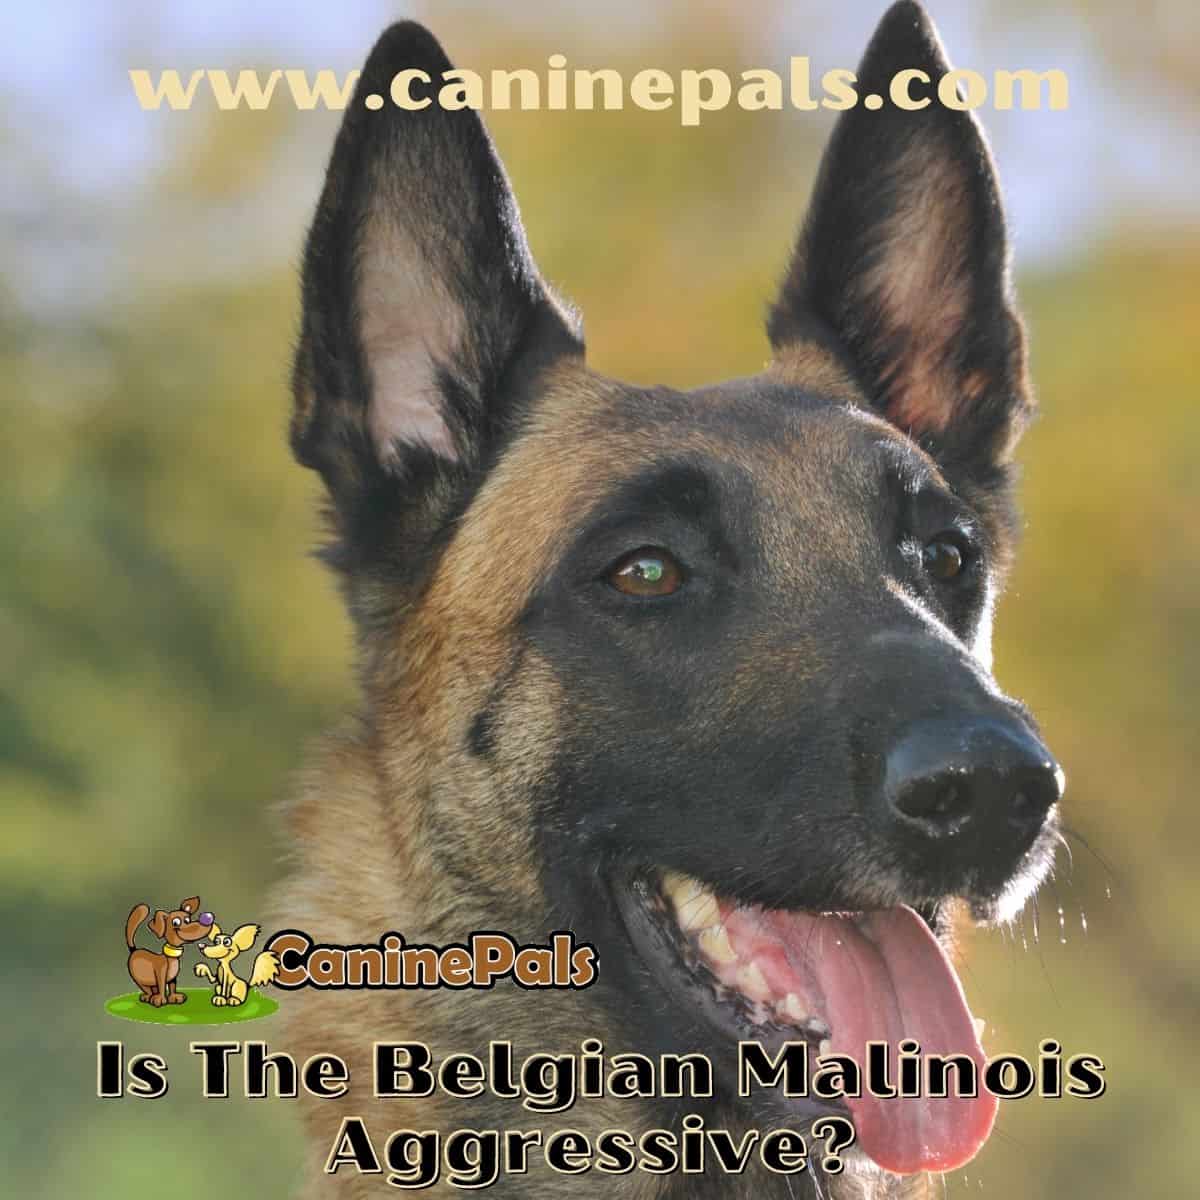 Is The Belgian Malinois Aggressive?